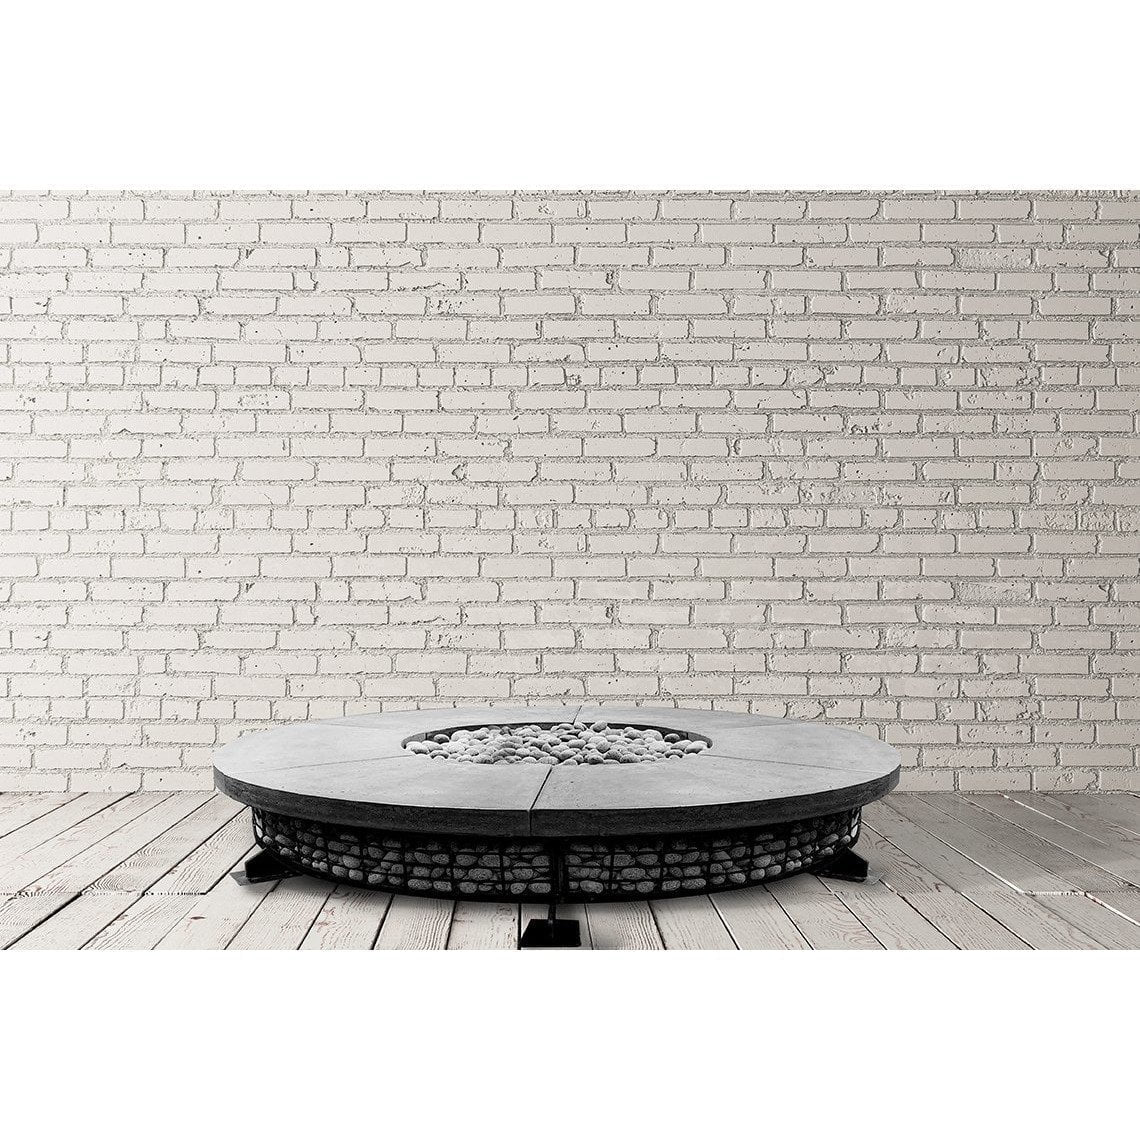 Prism Hardscapes - Fuego 89 Fire Table in GFRC Concrete - Match Lit - Majestic Fountains